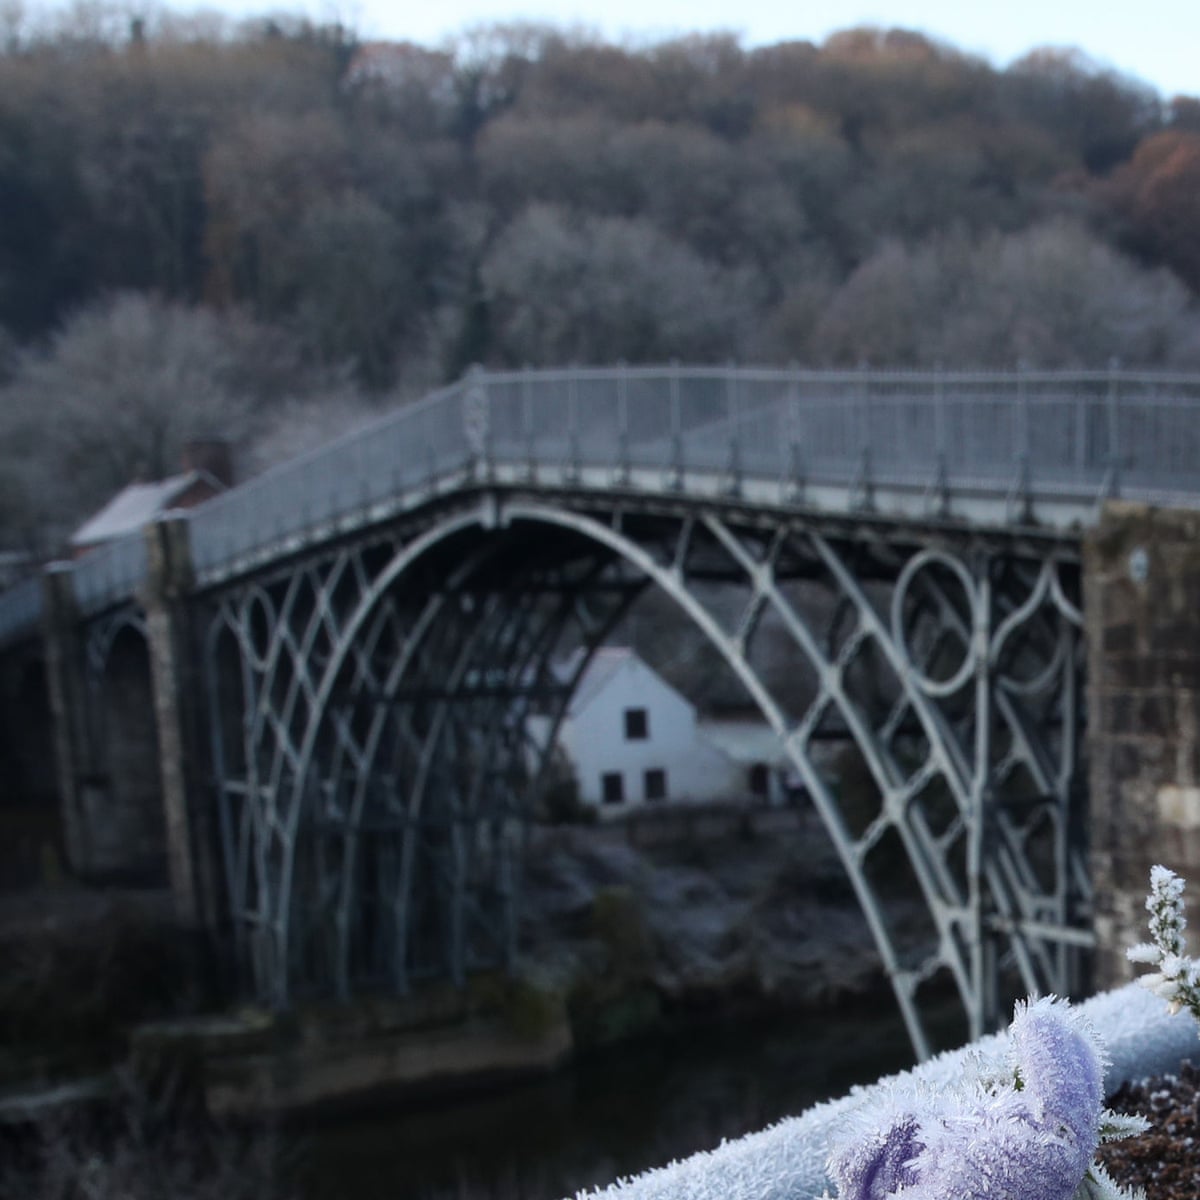 Iron Bridge Gets 3 6m Facelift As Age Catches Up With 250 Year Old Arch Heritage The Guardian